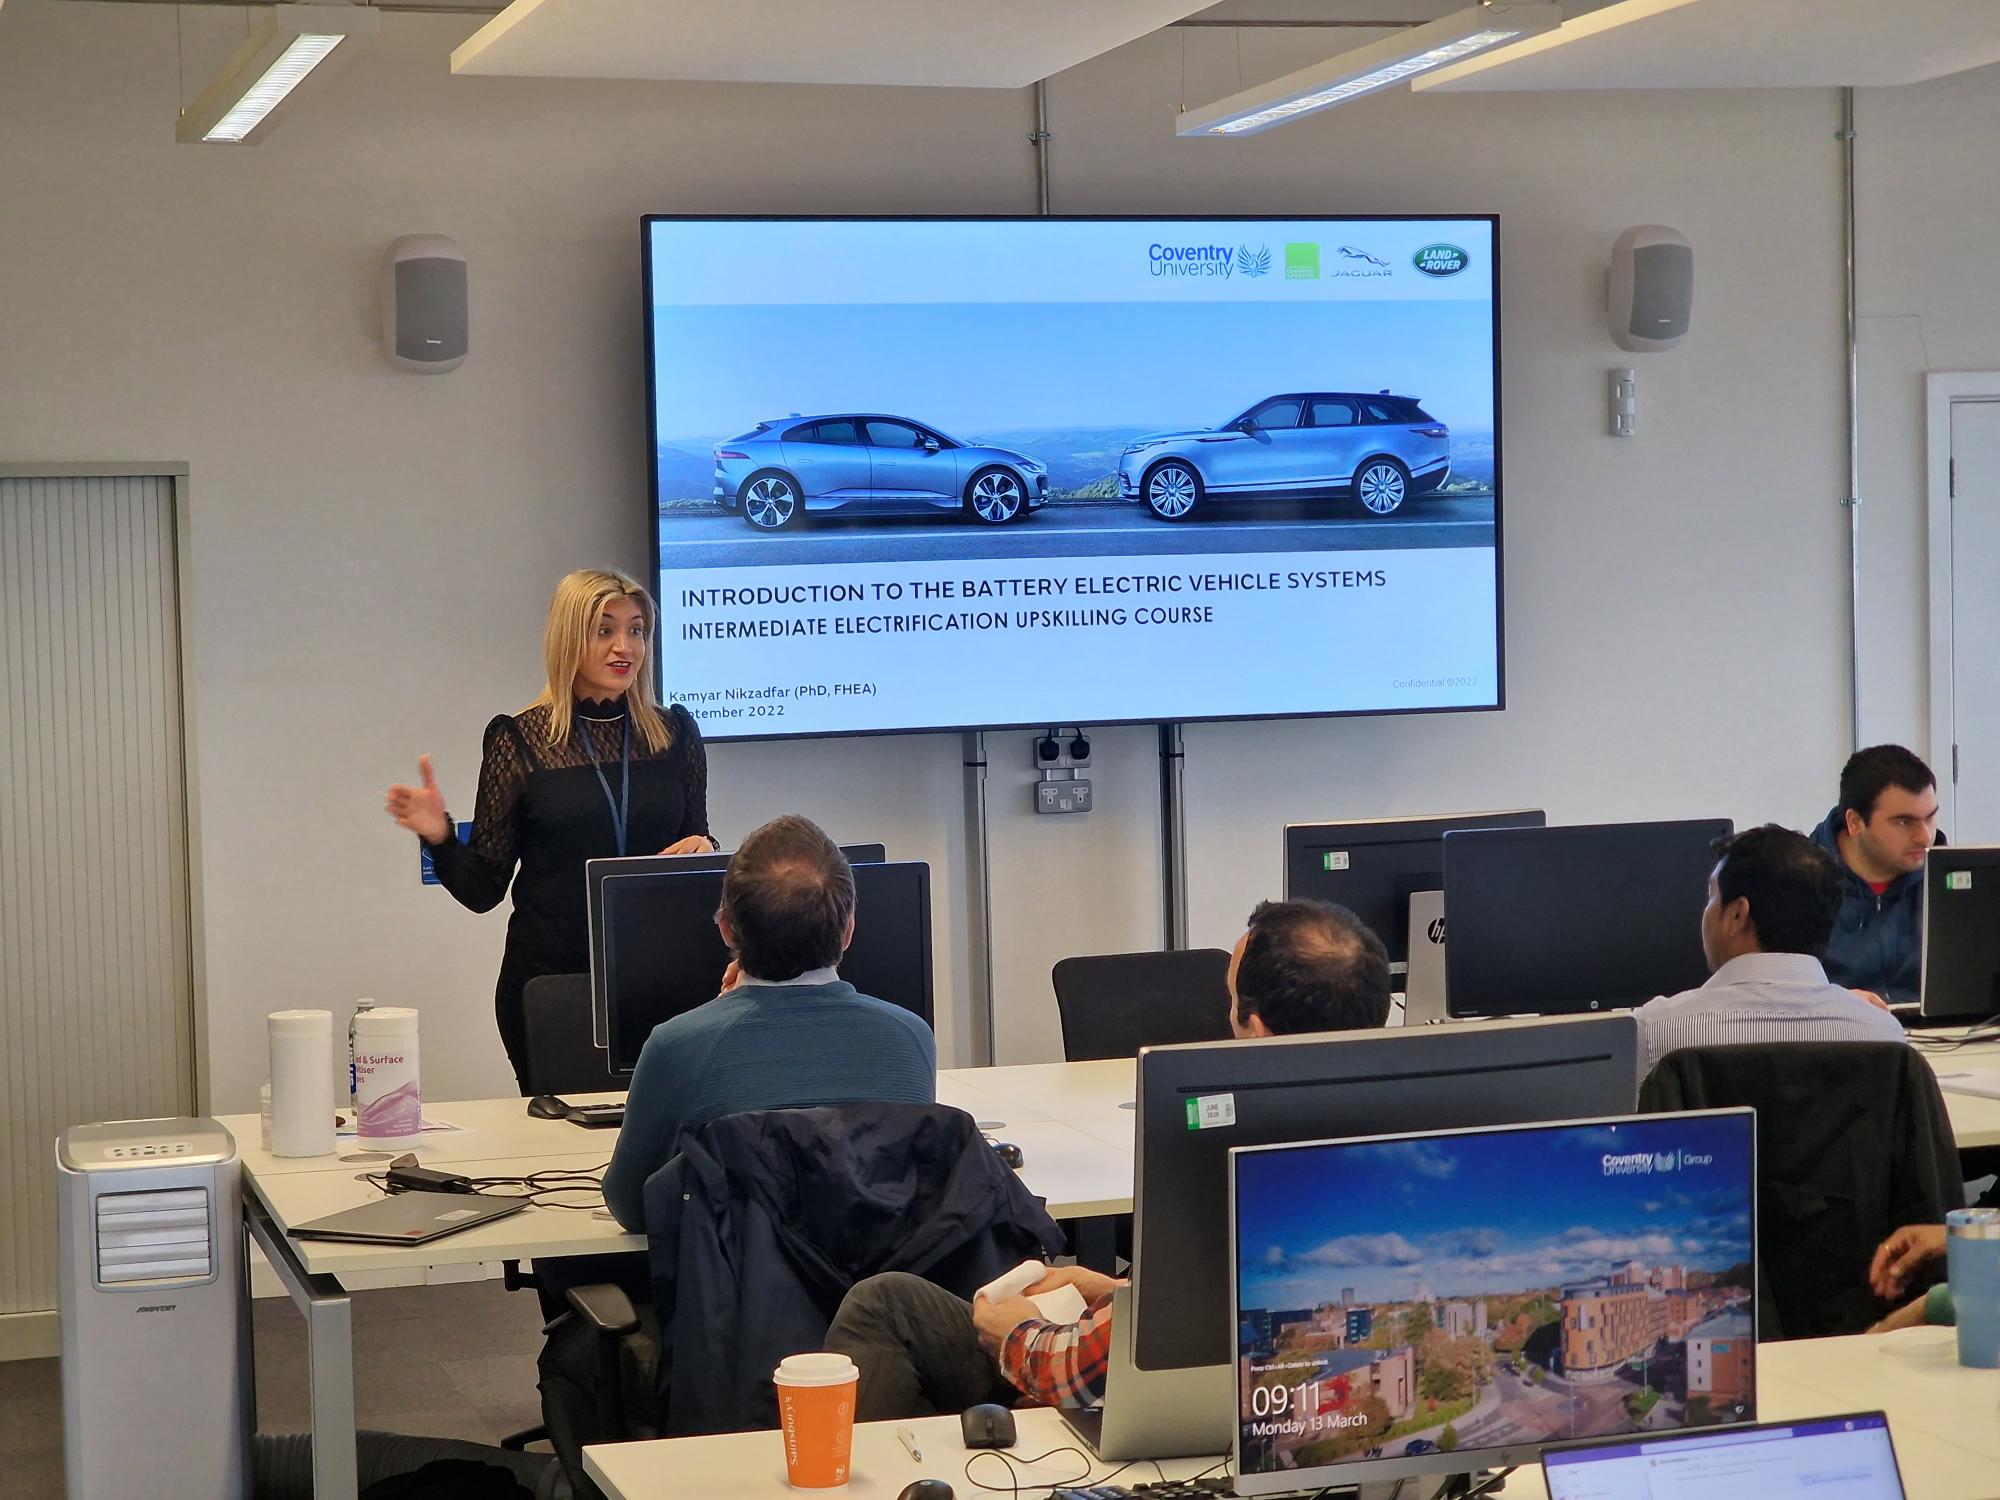 Coventry University and JLR team up to upskill workforce for the electric revolution